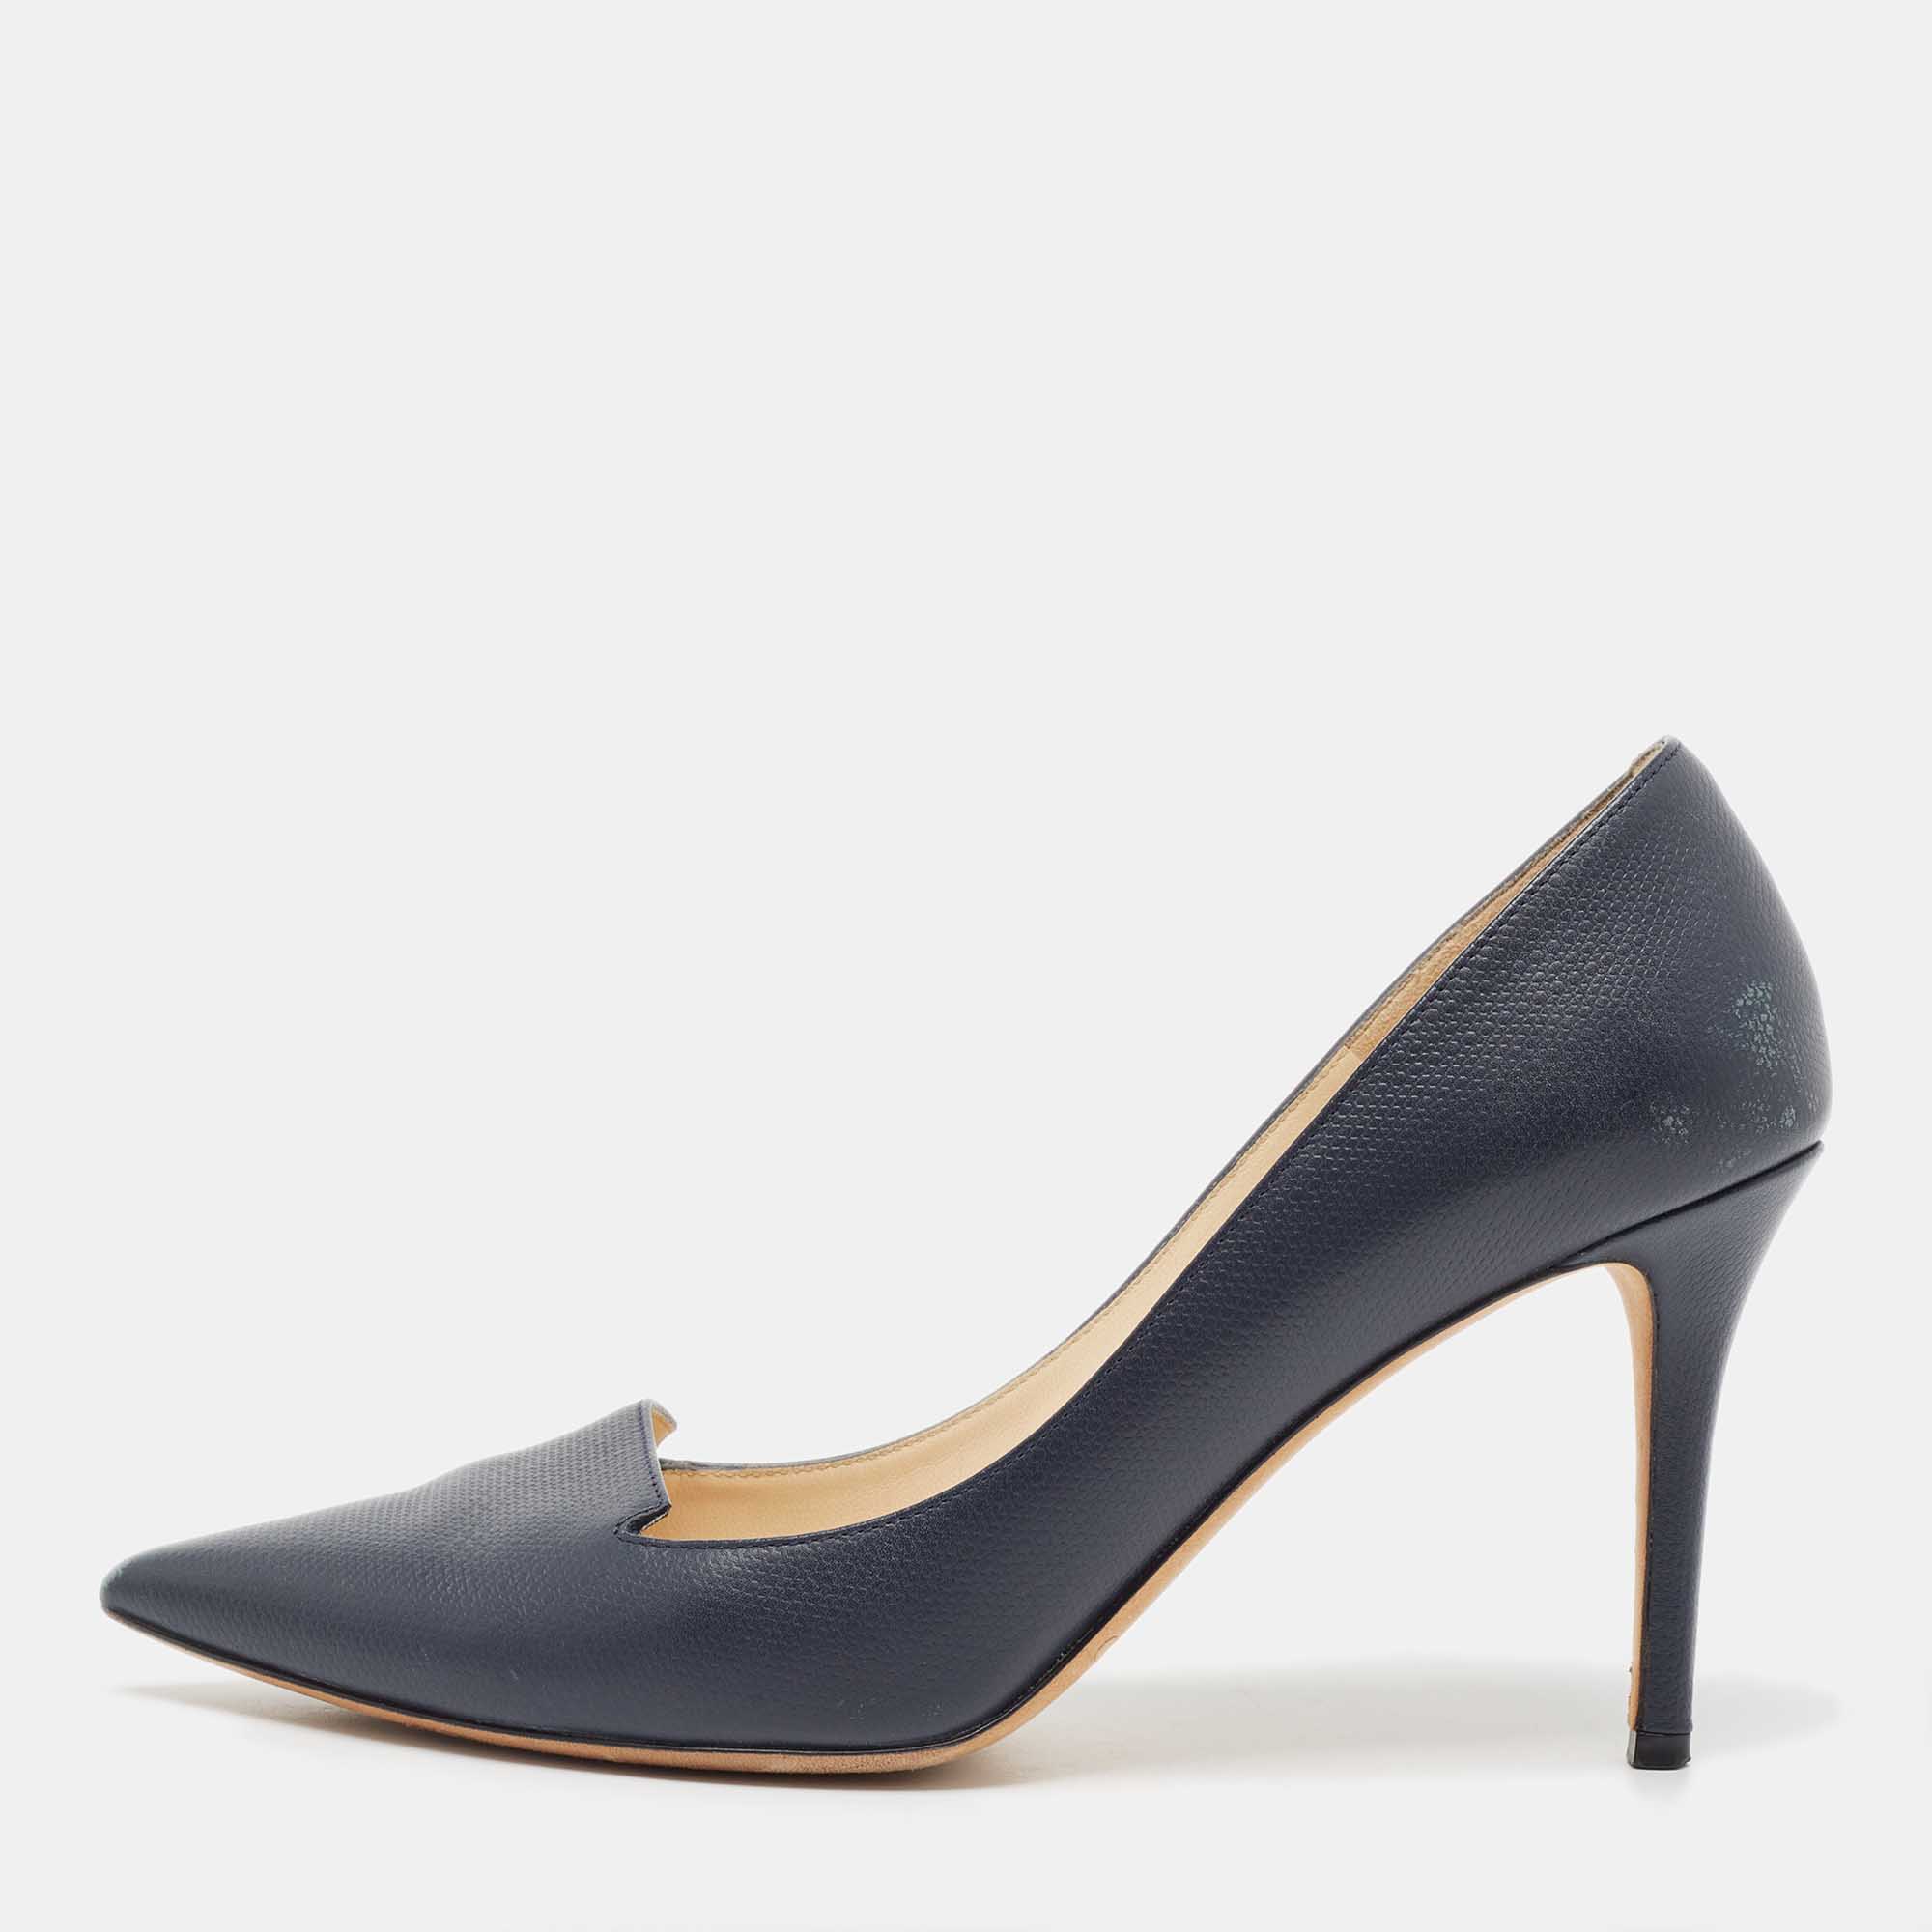 Jimmy Choo Dark Blue Leather Pointed Toe Pumps Size 38.5